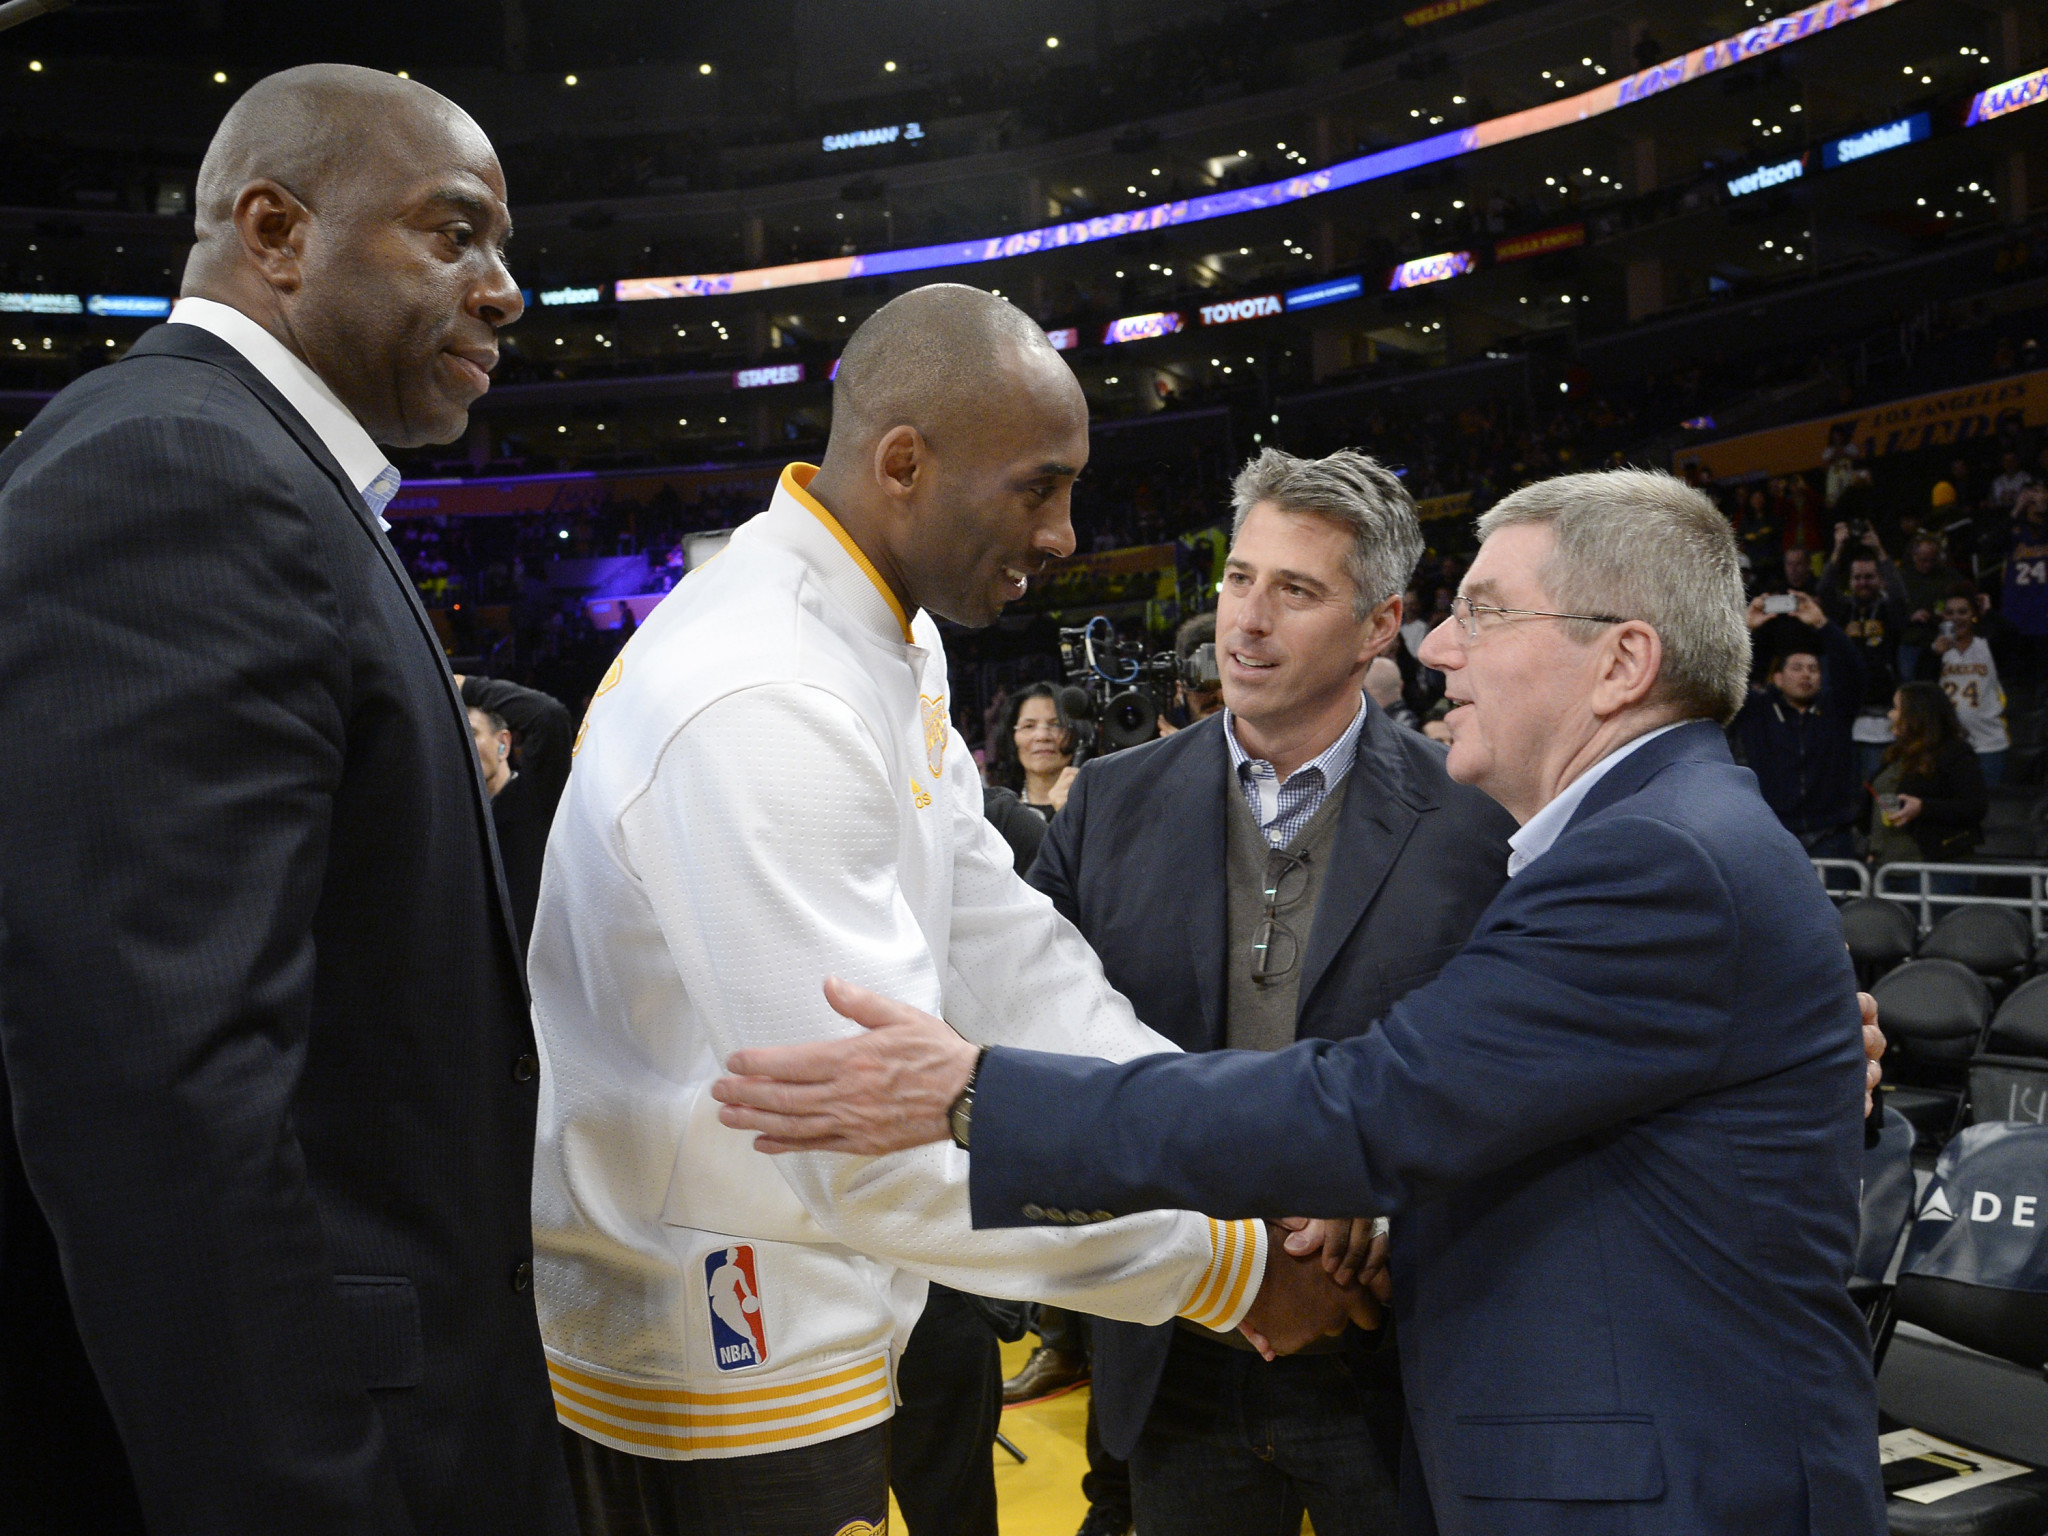 Thomas Bach, right, pictured meeting basketball superstar Kobe Bryant during a visit to Los Angeles in 2016 ©Getty Images